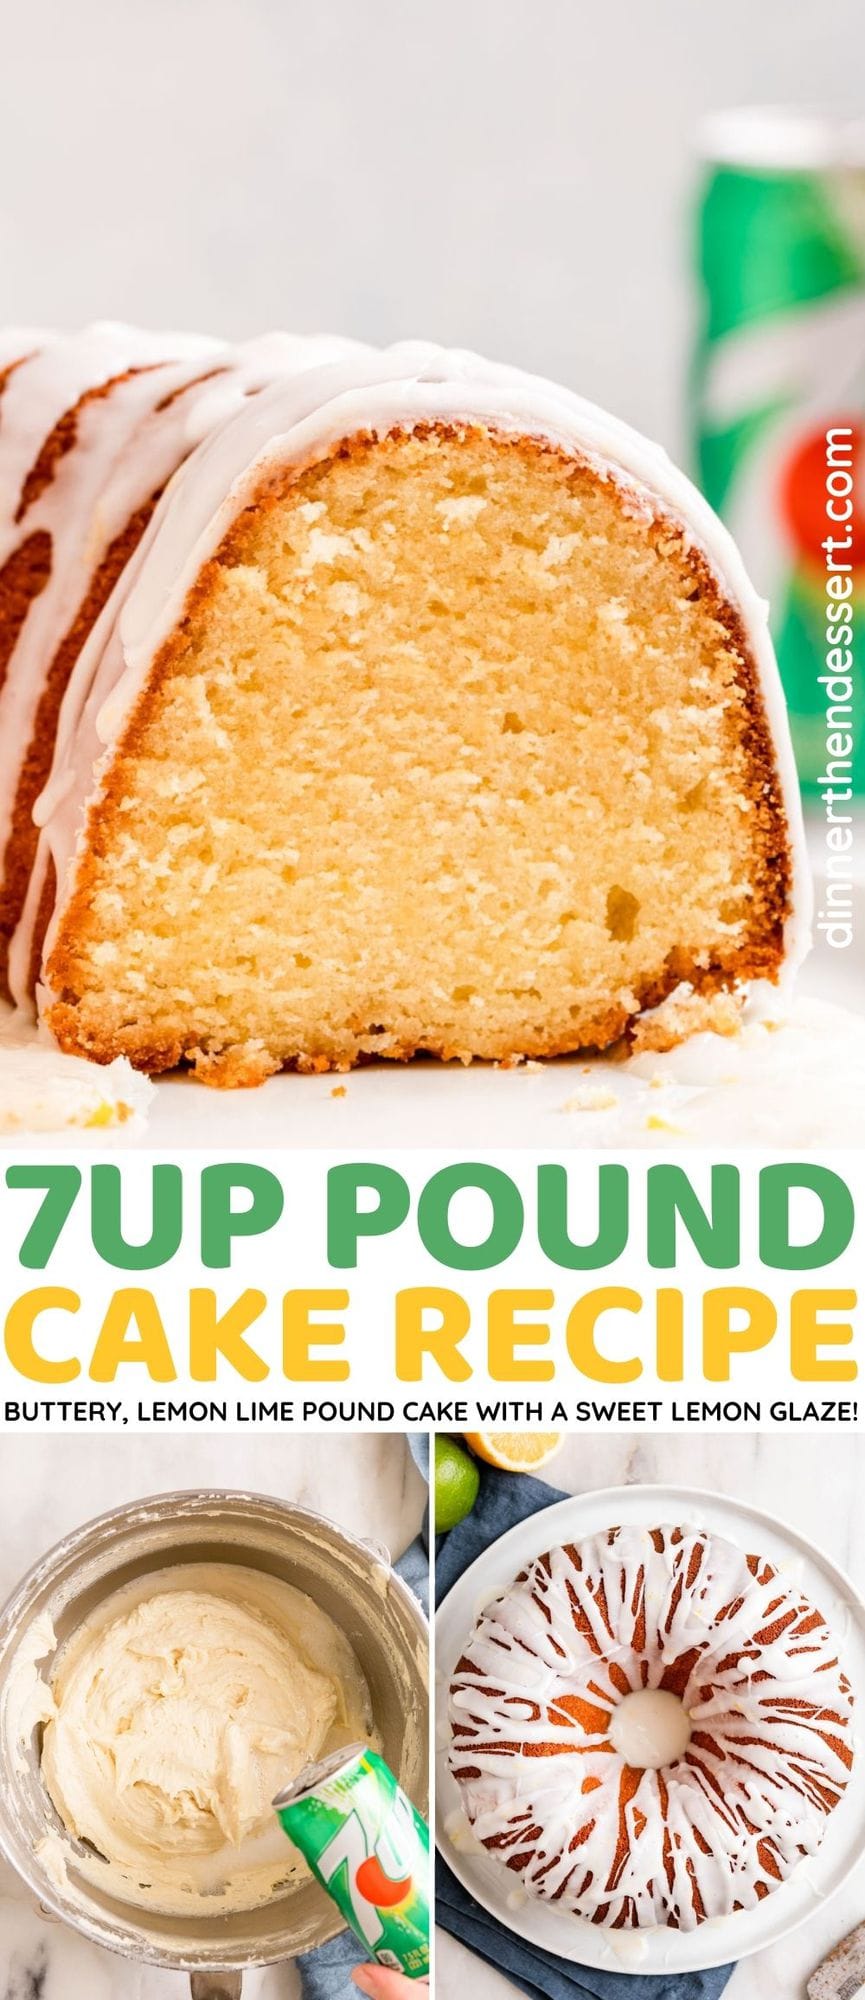 7up Pound Cake baked on plate with glaze side view slice removed collage